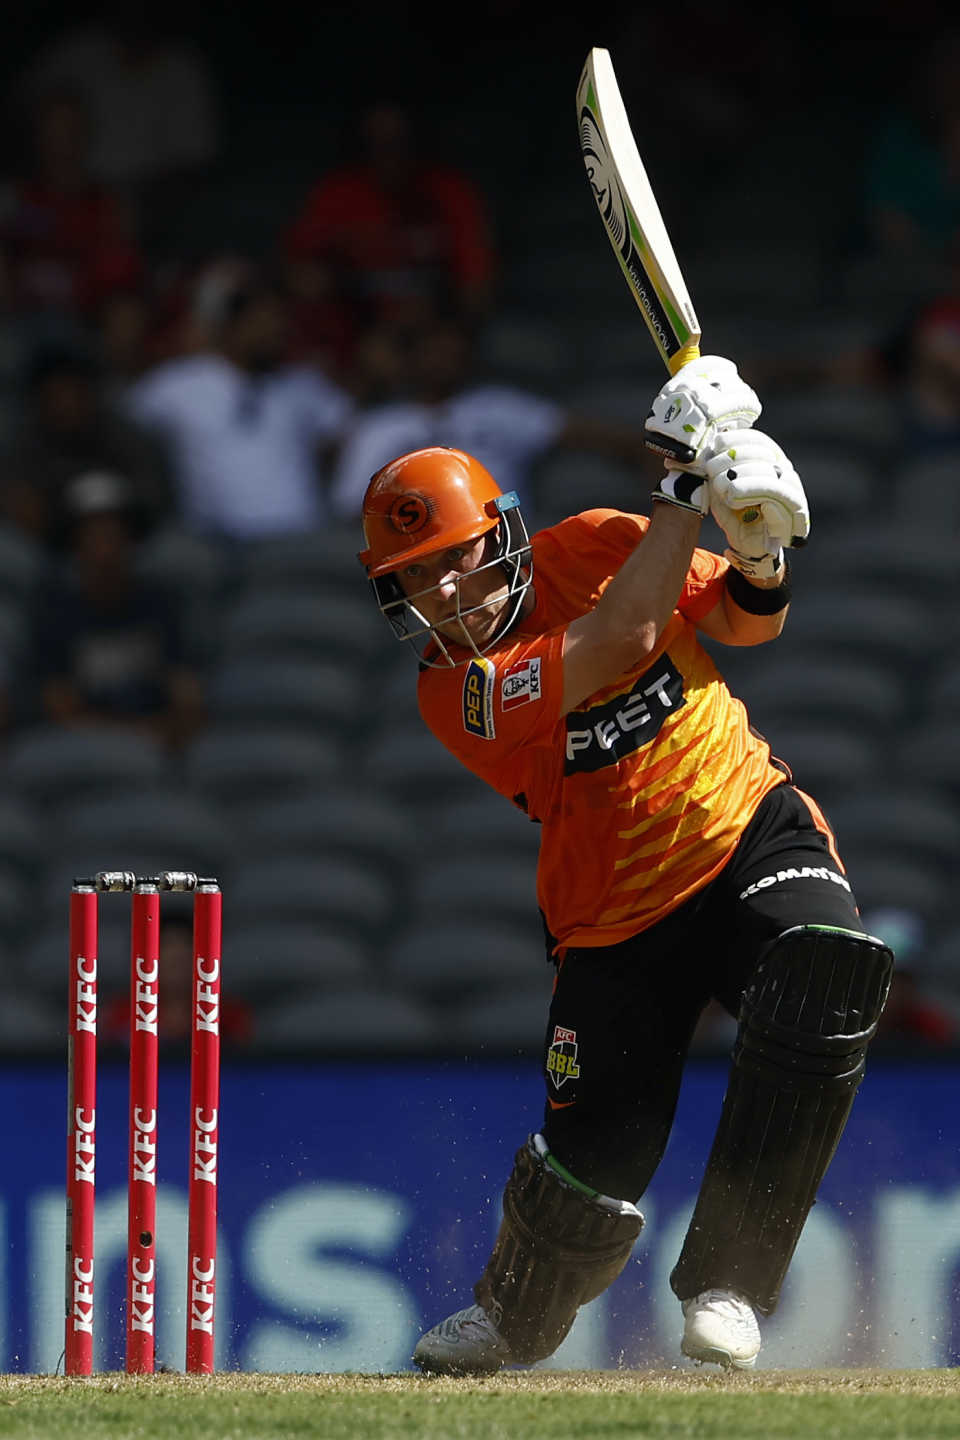 Josh Inglis' 47 and two catches made him the player of the match, Melbourne Renegades vs Perth Scorchers, Big Bash League 2022-23, Melbourne, January 01, 2023